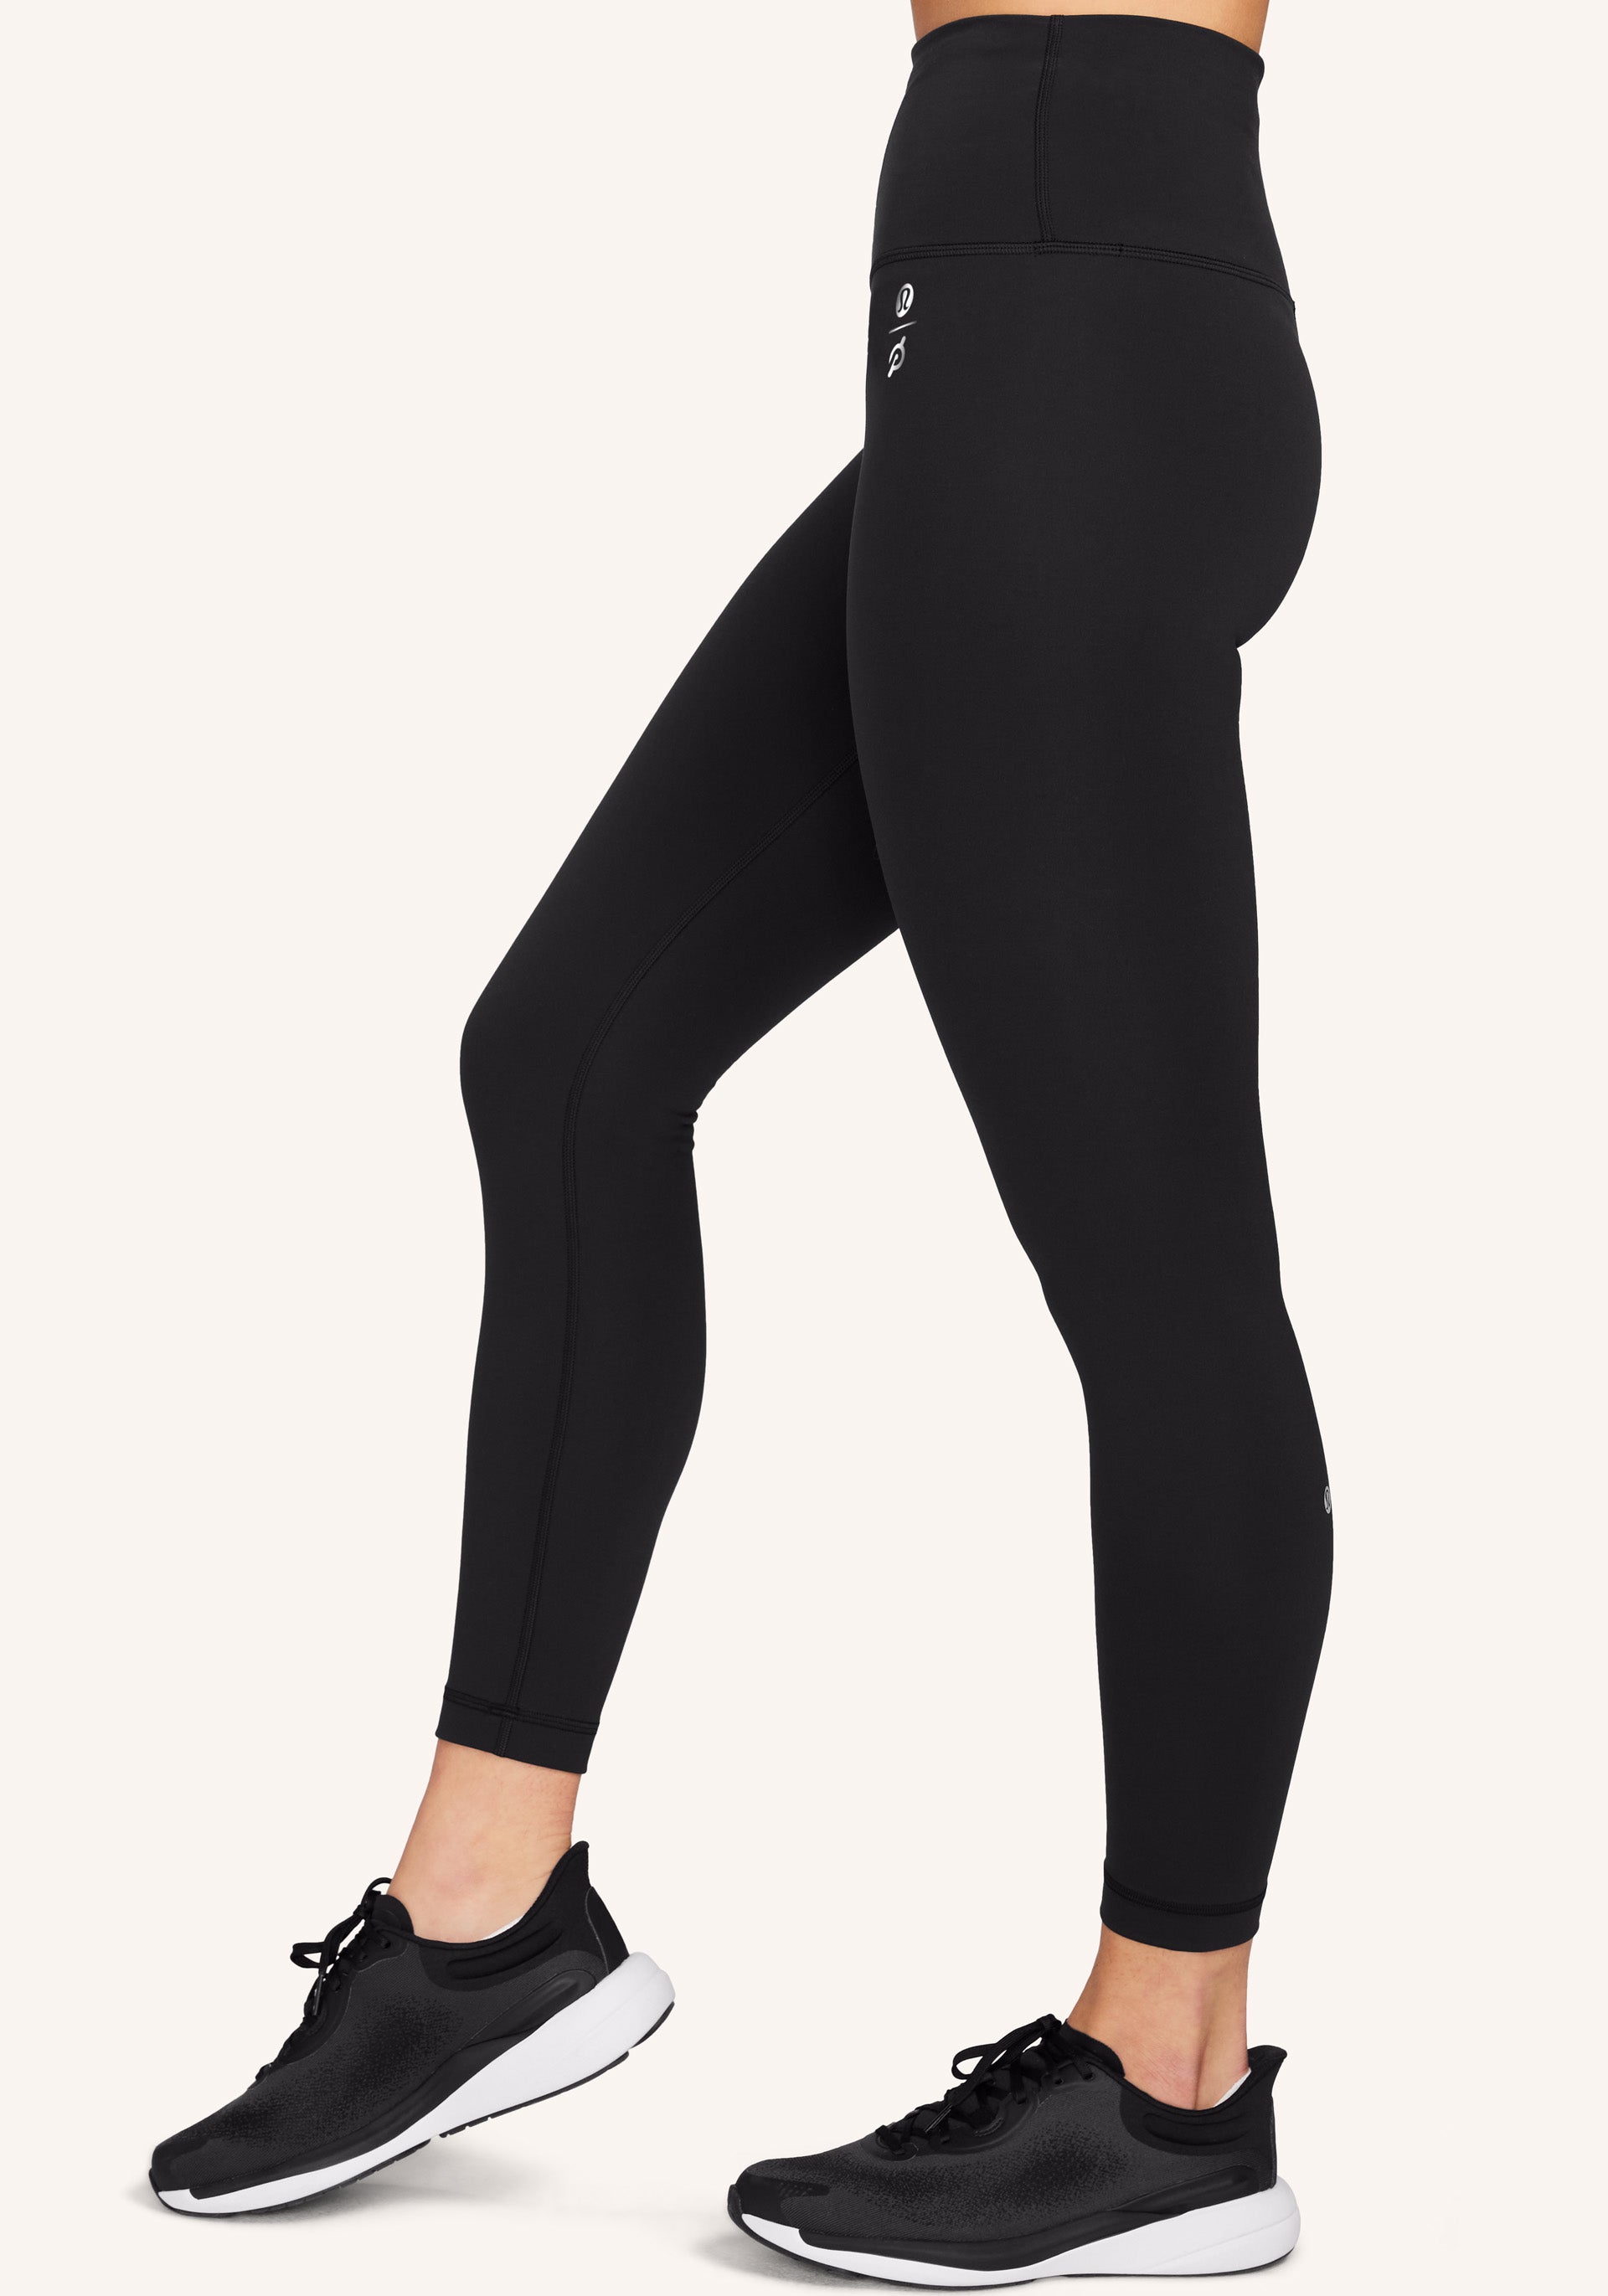 Limited Edition Fast and Free High-Rise Tight 25, Women's Leggings/Tights